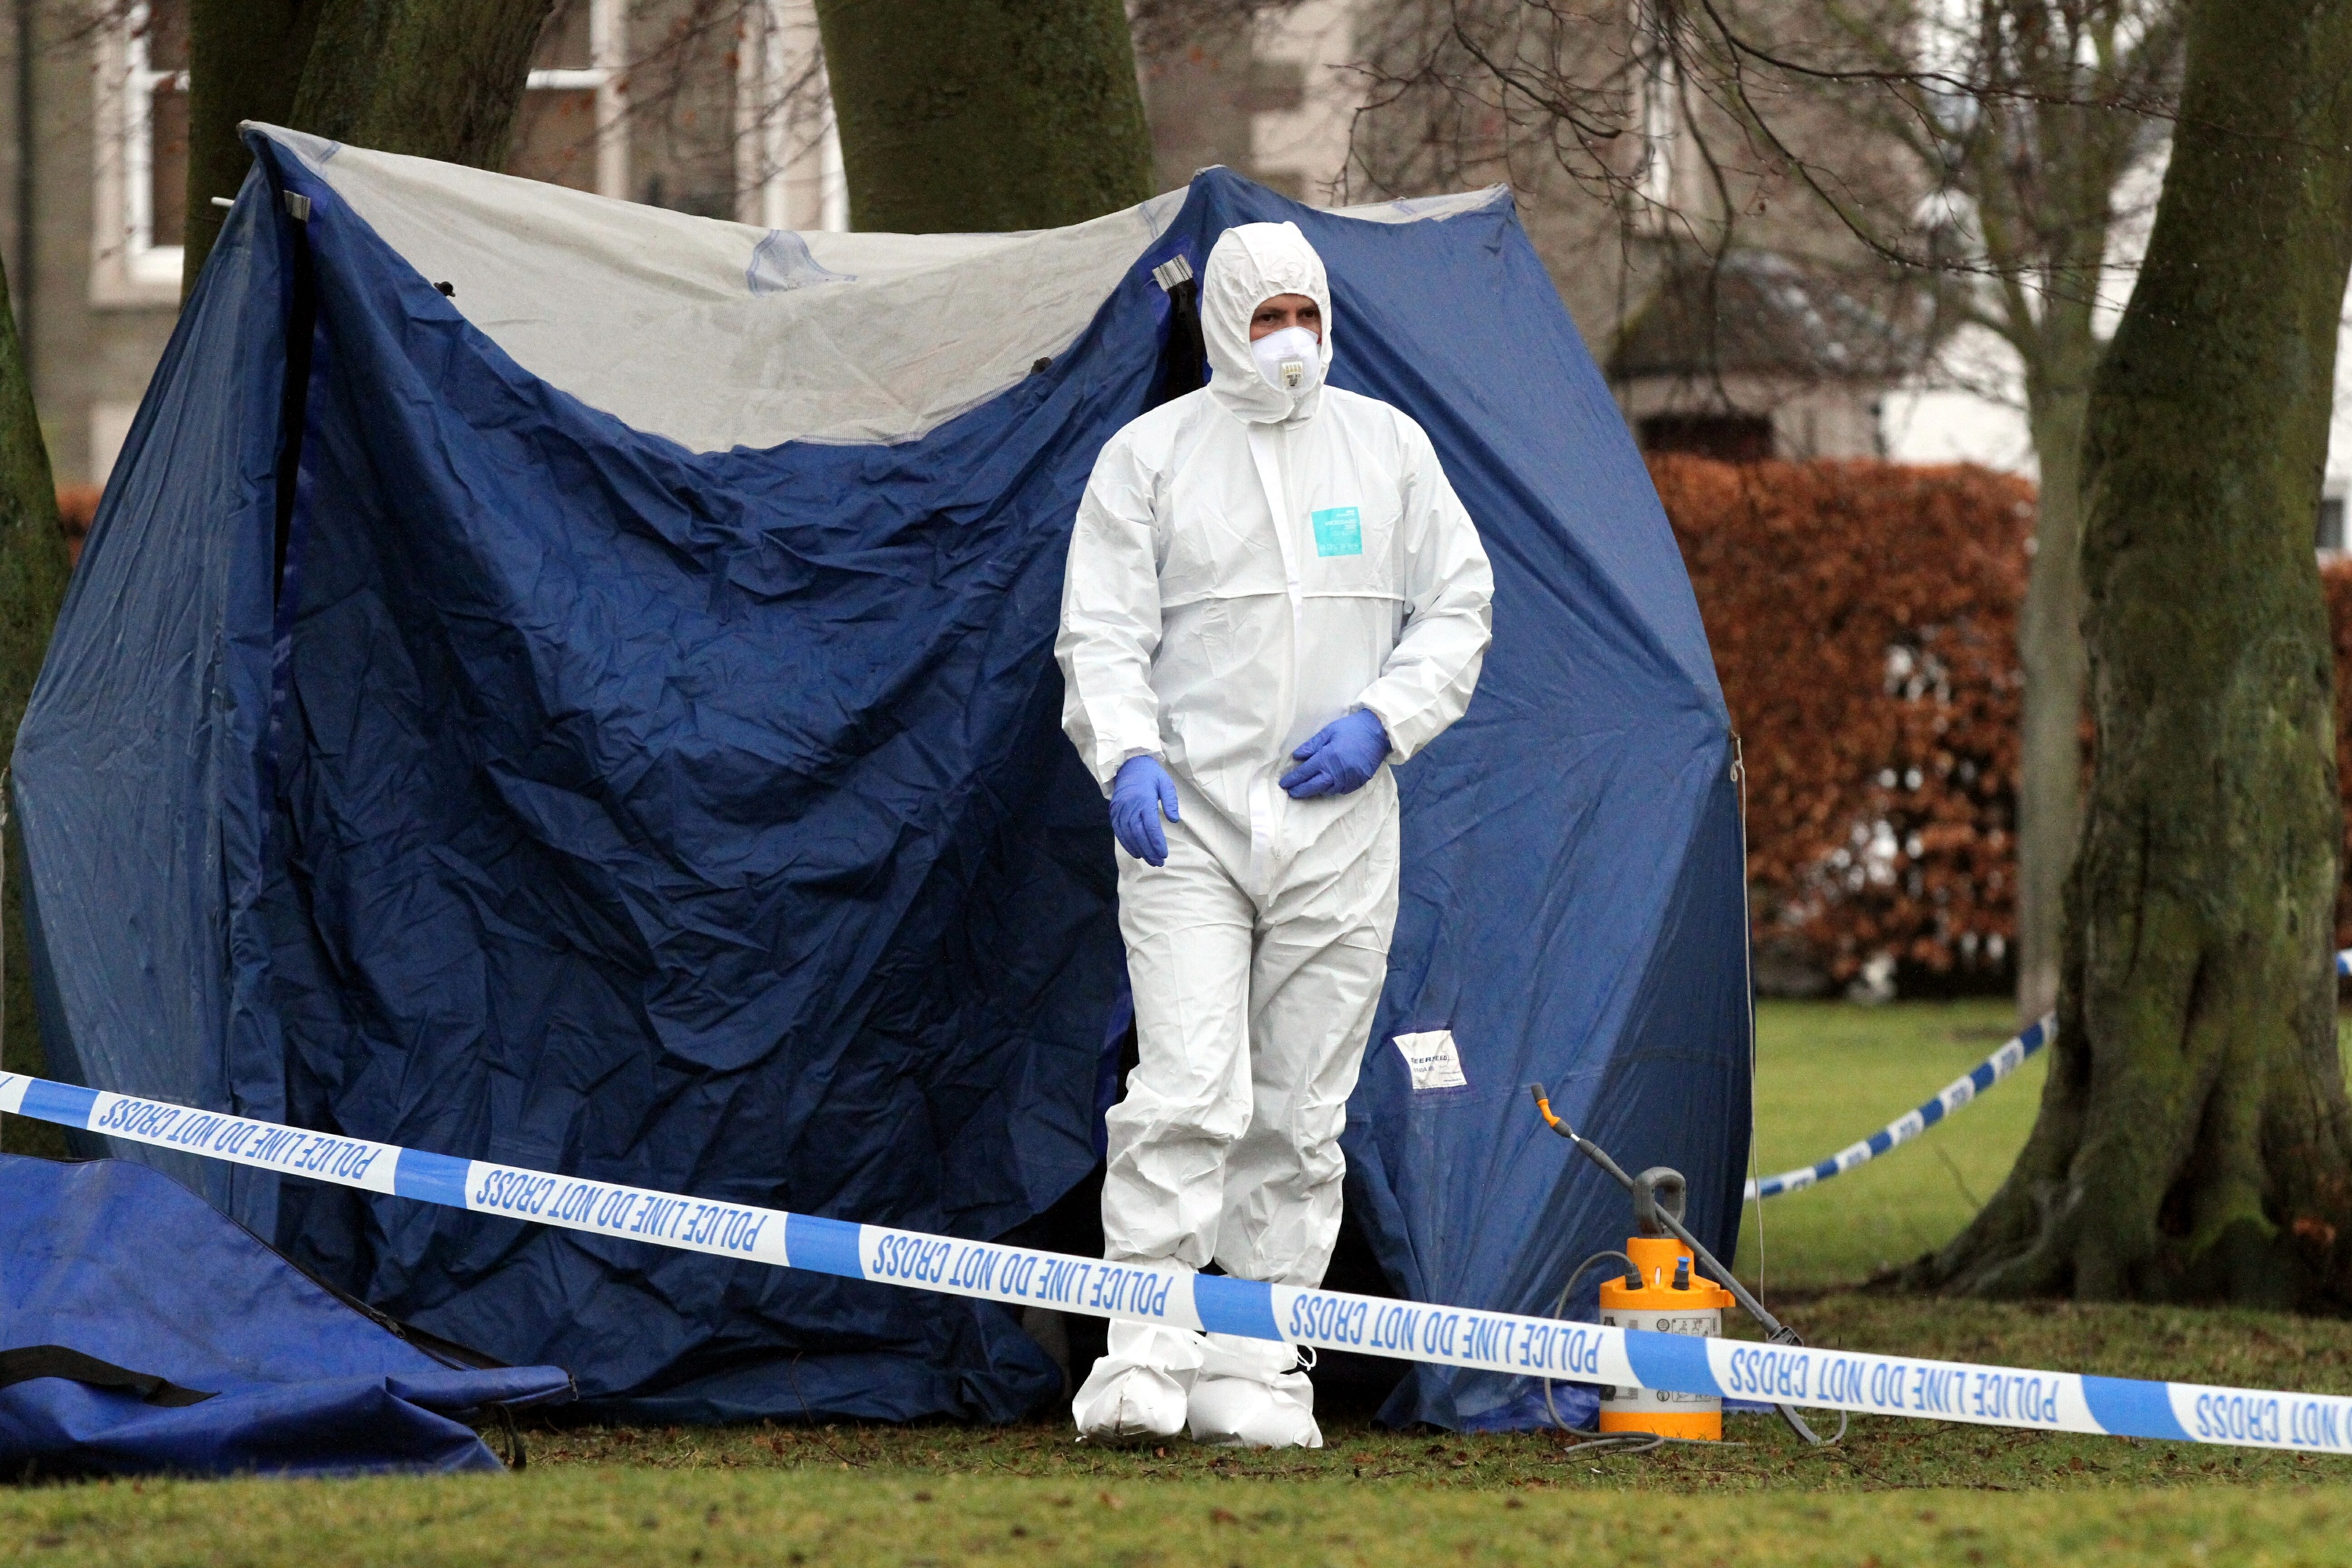 Forensic specialists at the scene in Orchar Park, Broughty Ferry